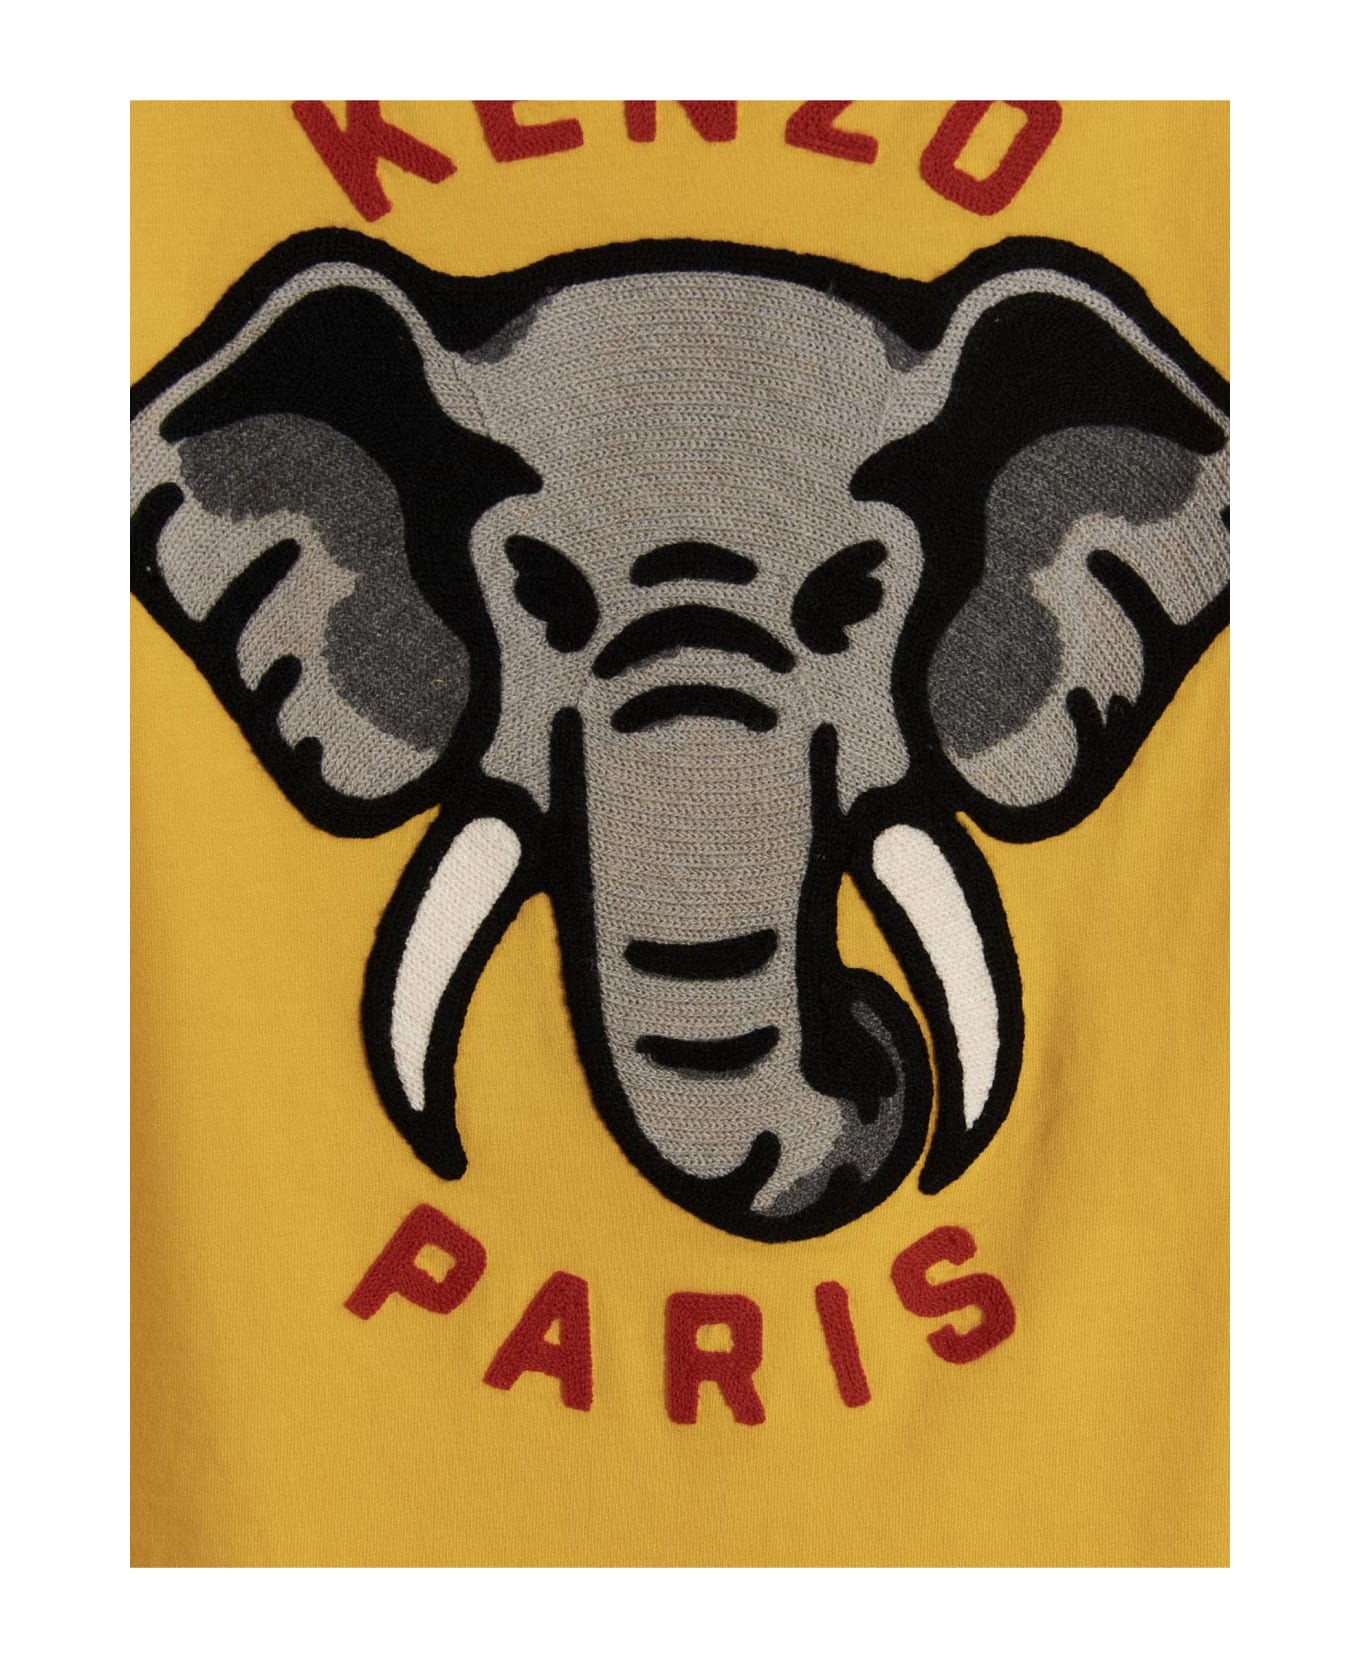 Kenzo Oversize T-shirt With Elephant And Logo On The Chest - YELLOW